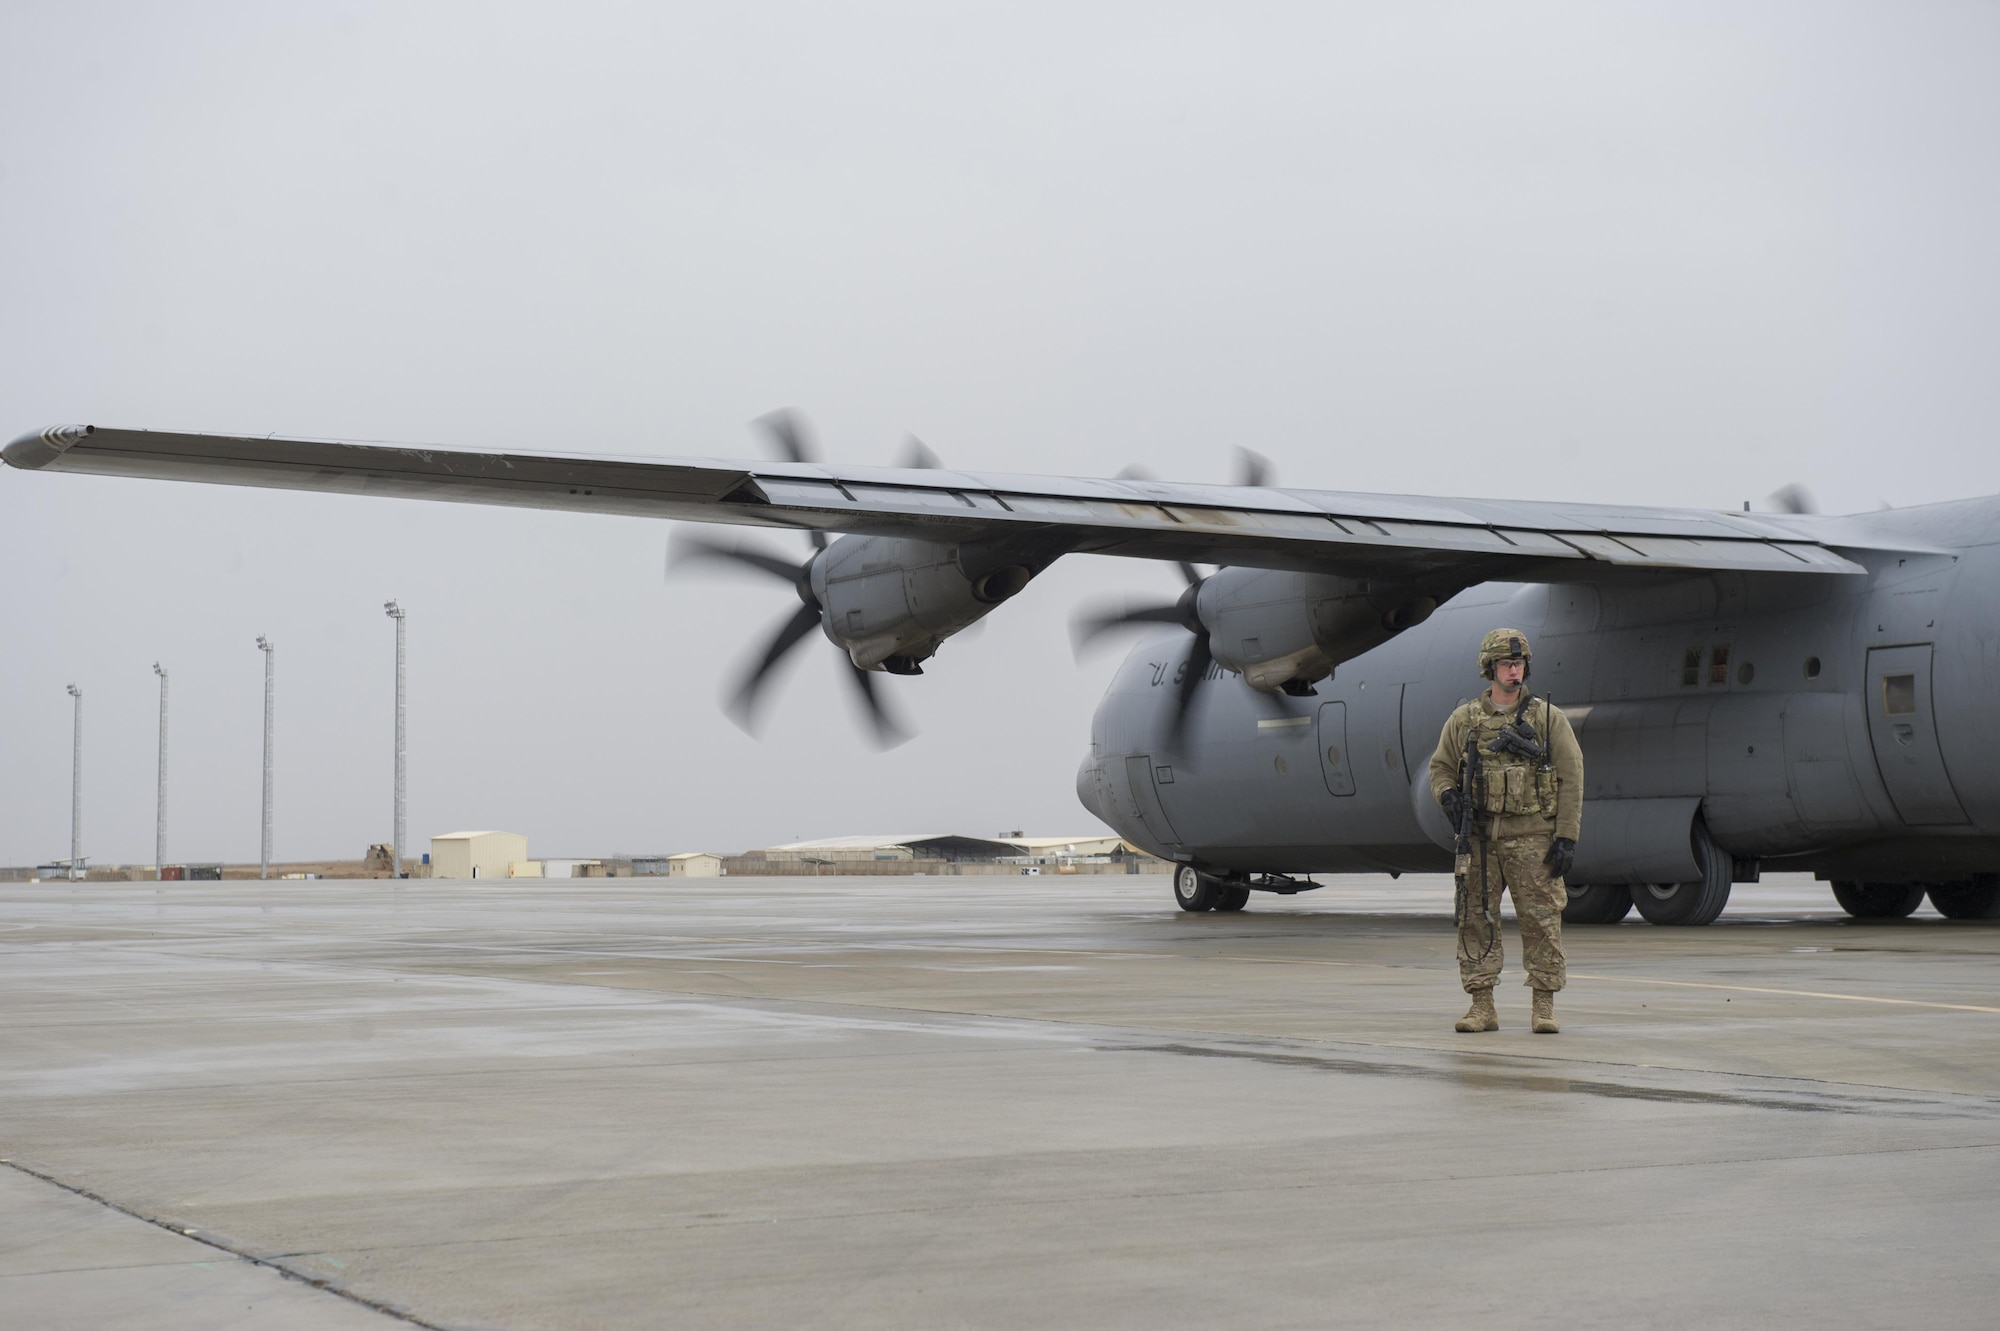 Staff Sgt. Tyler Berogan, a 455th Expeditionary Security Forces Squadron Fly Away Security Team member, provides security as a C-130J Super Hercules is unloaded at Camp Bastion, Afghanistan, Jan. 3, 2016. The 455th ESFS FAST is the all-encompassing security team that provides ground safety and cockpit denial to protect the aircraft and crew. (U.S. Air Force photo/Tech. Sgt. Robert Cloys)